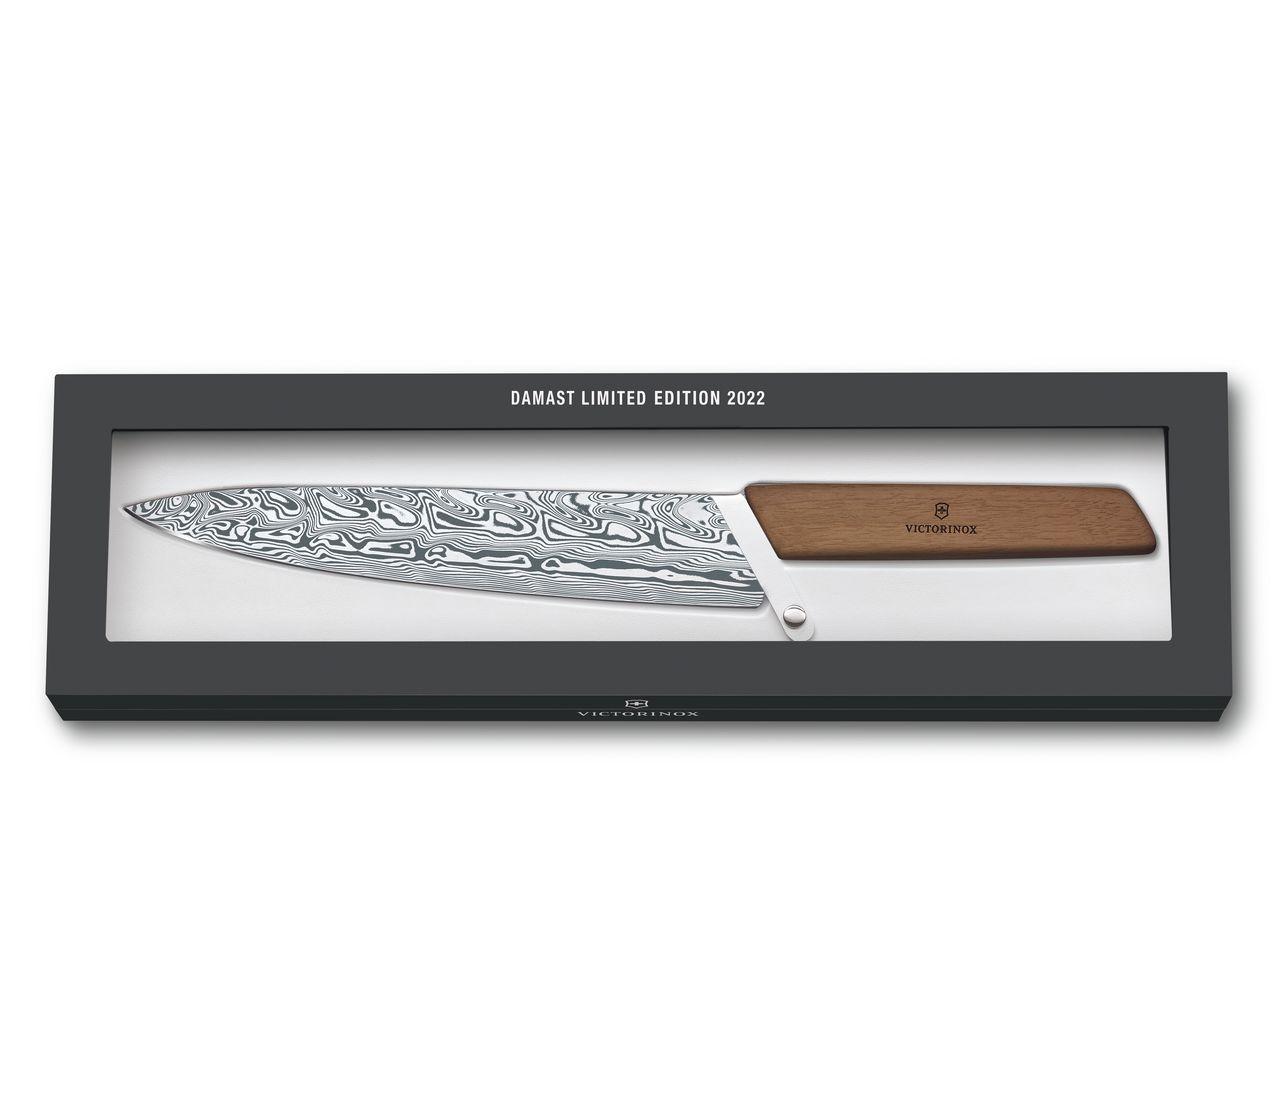 Swiss Modern Carving Knife Damast Limited Edition 2022-6.9010.22J22